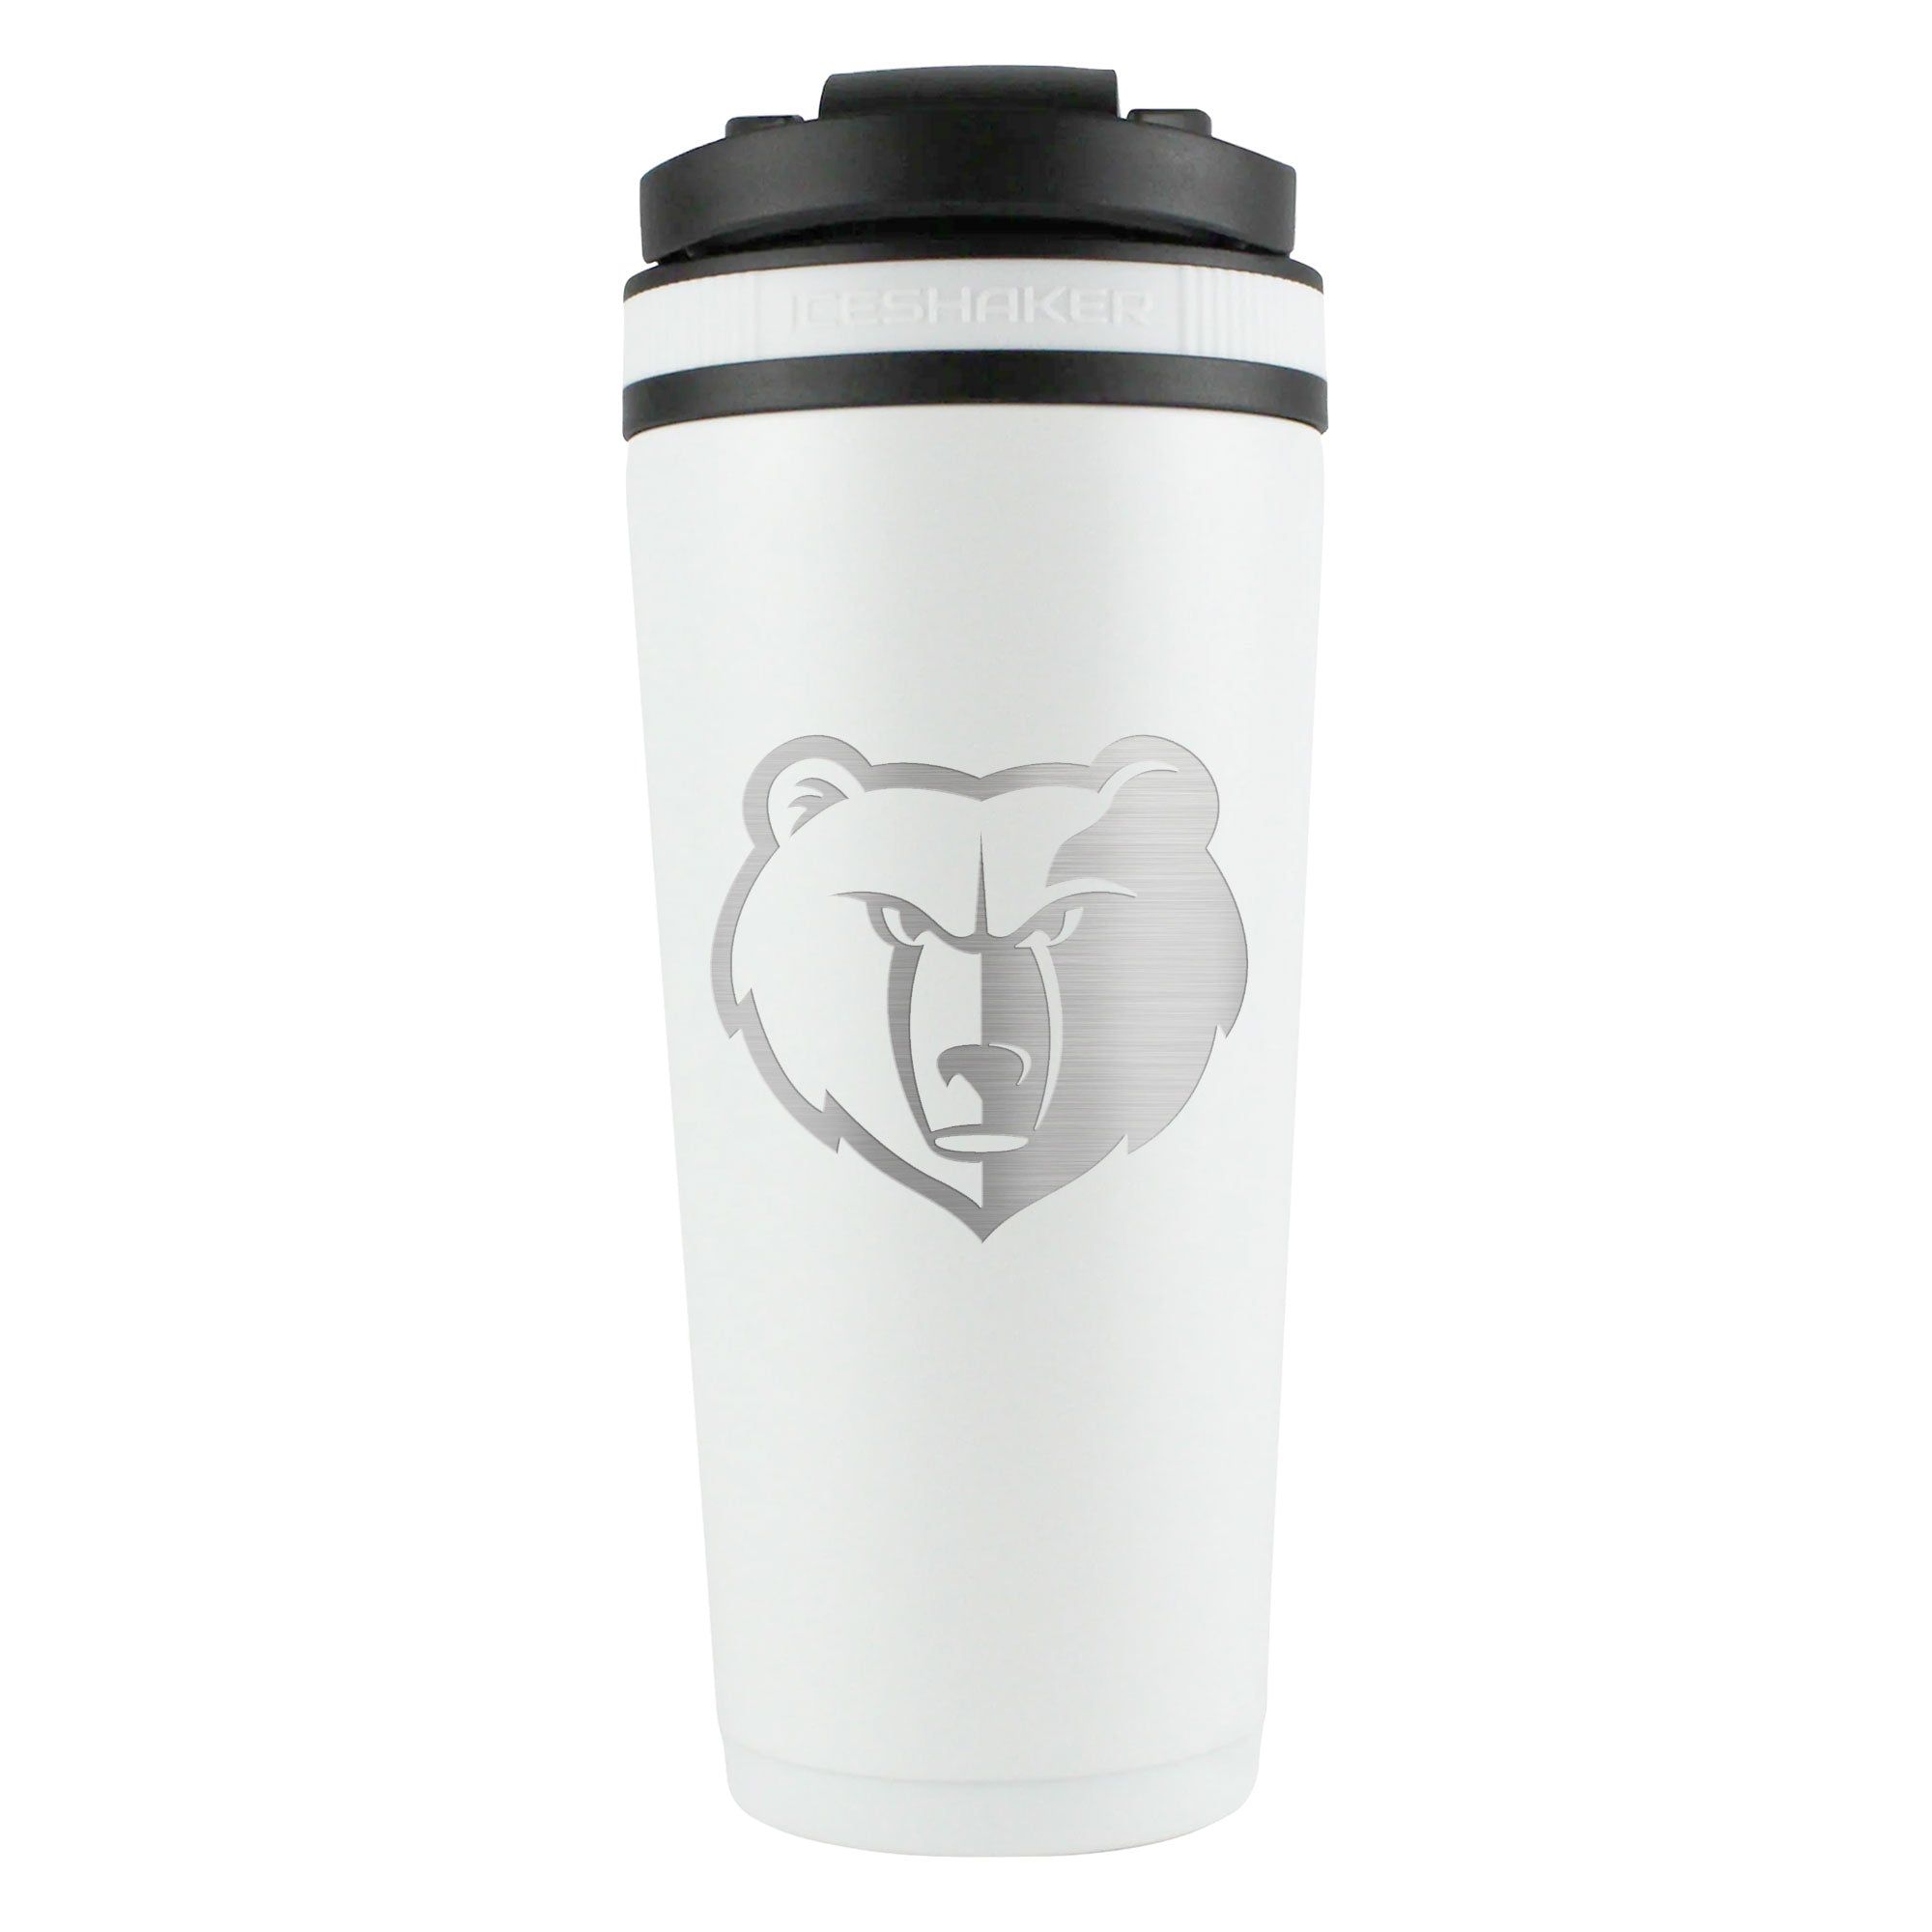 Officially Licensed Miami Heat 26oz Ice Shaker - White